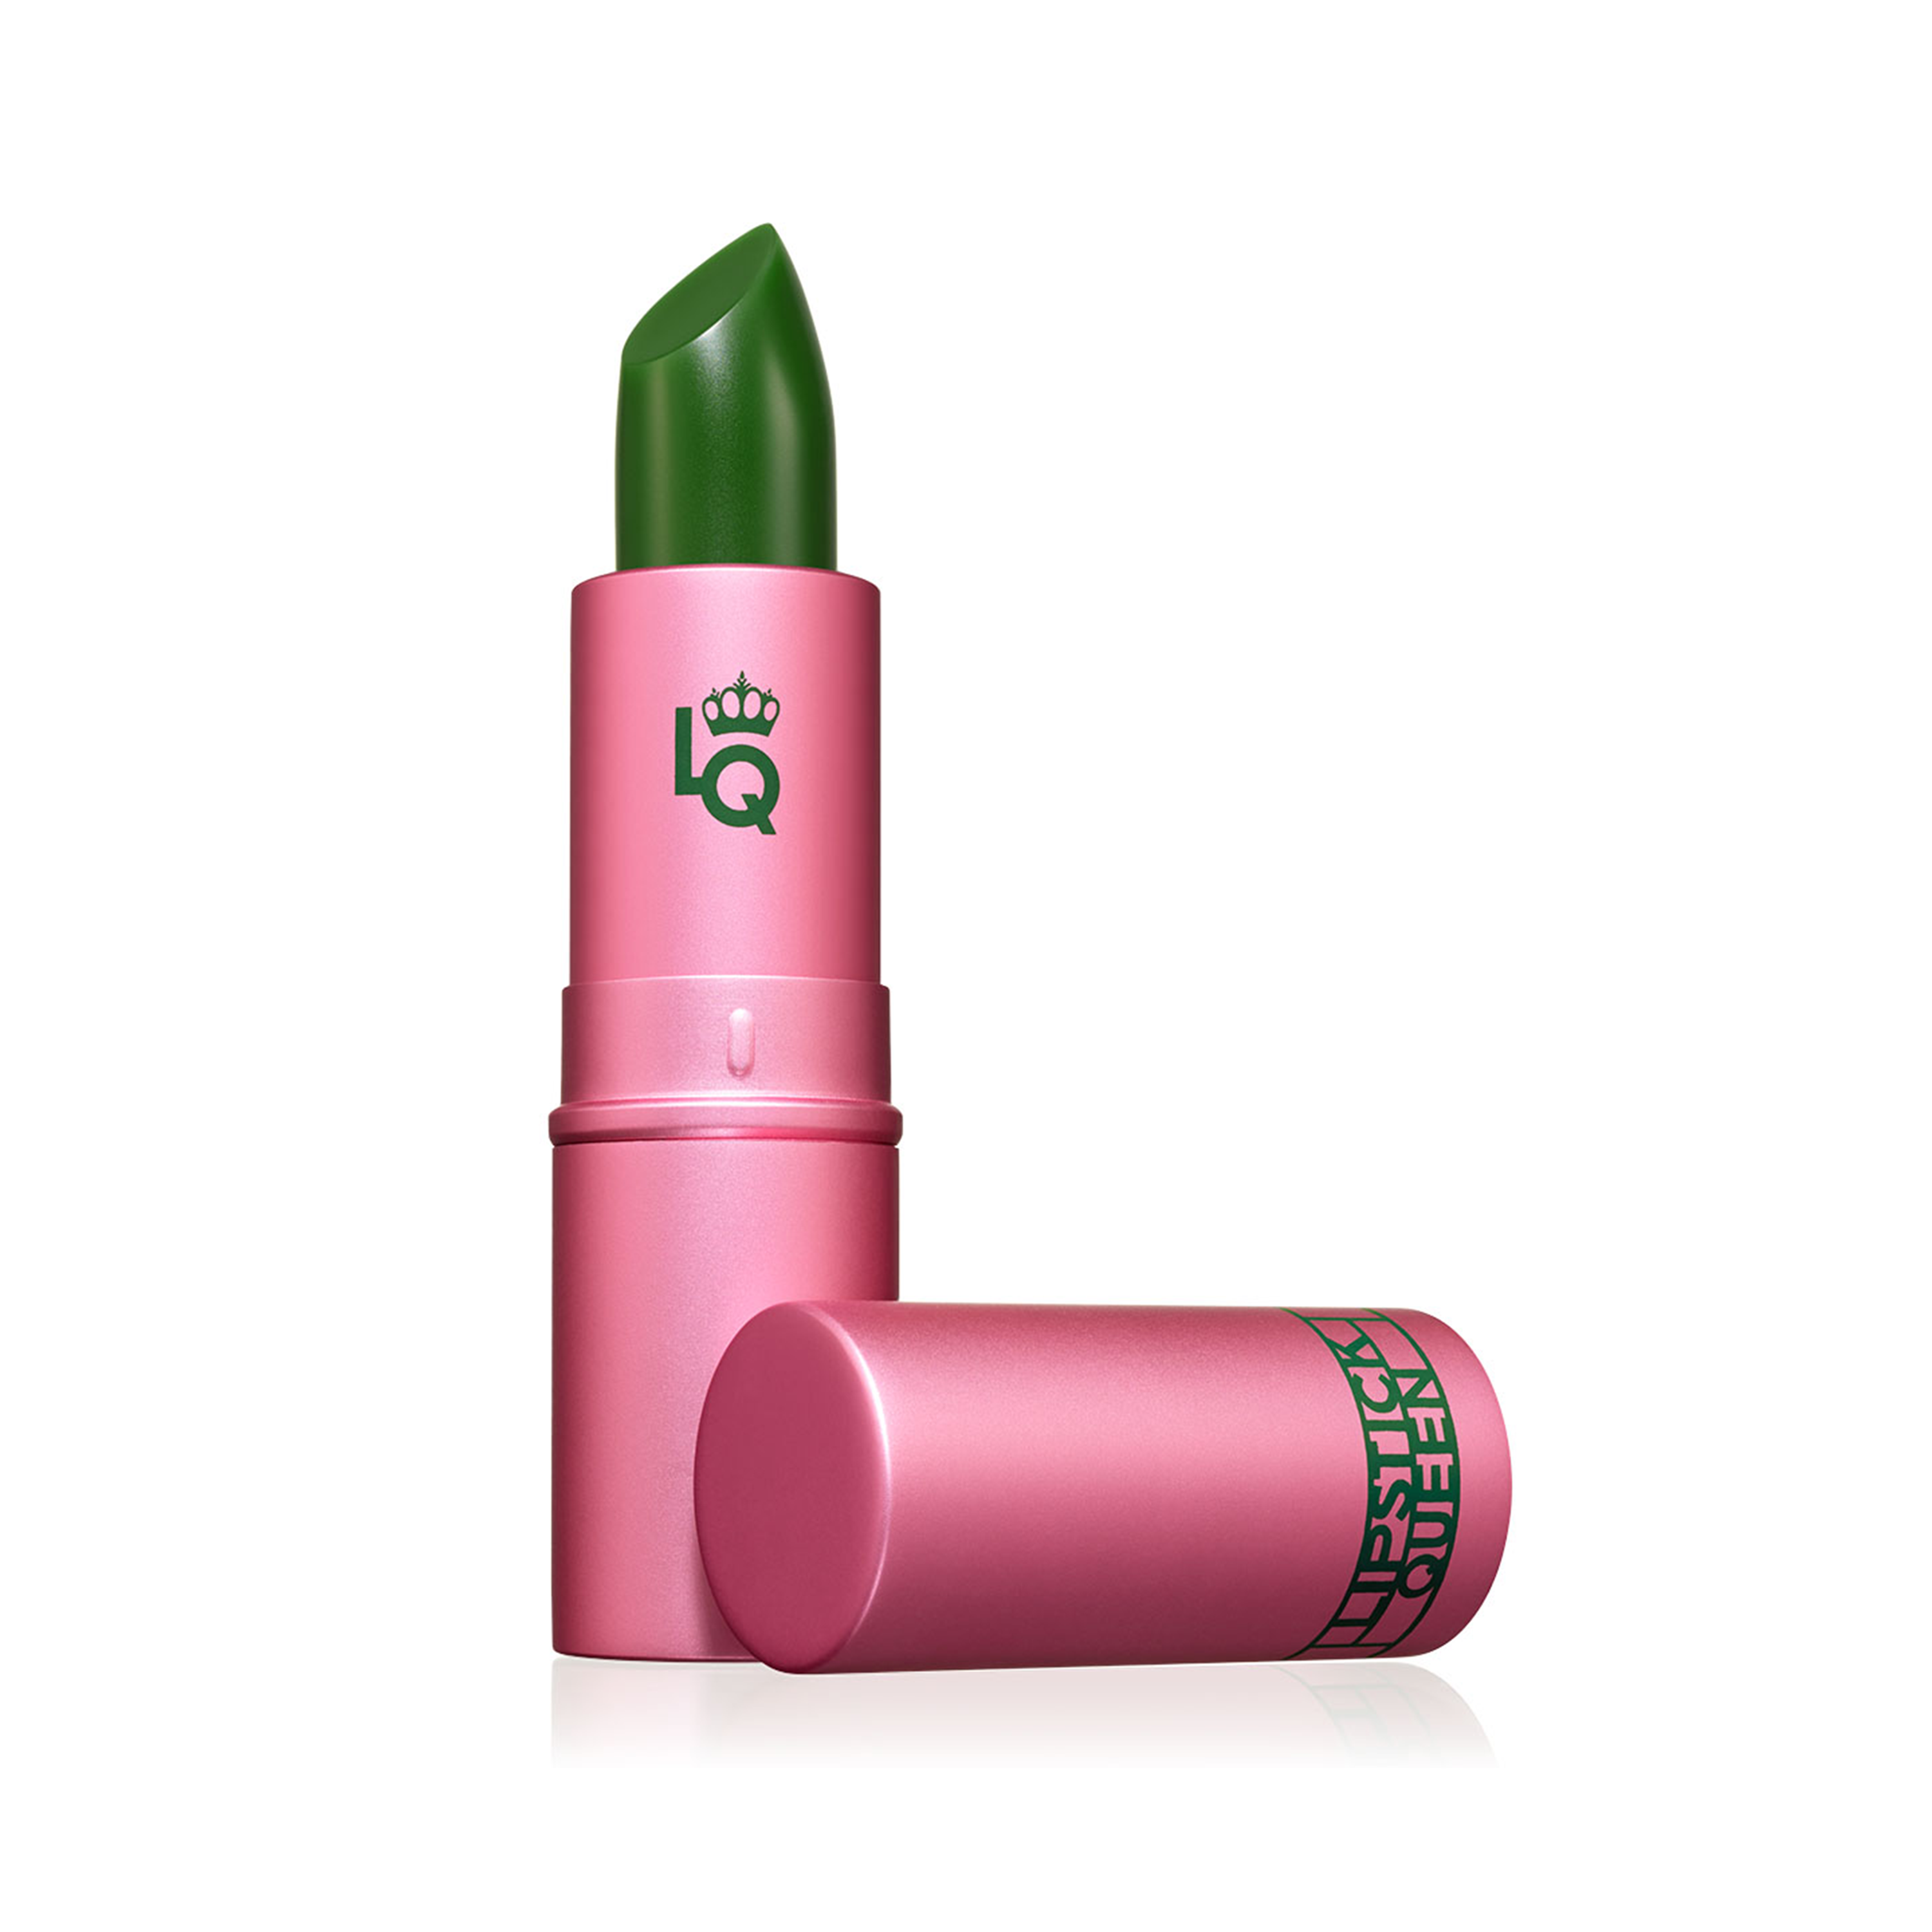 Lipstick Queen Shade Shifter, Frog Prince Lipstick - image 1 of 8